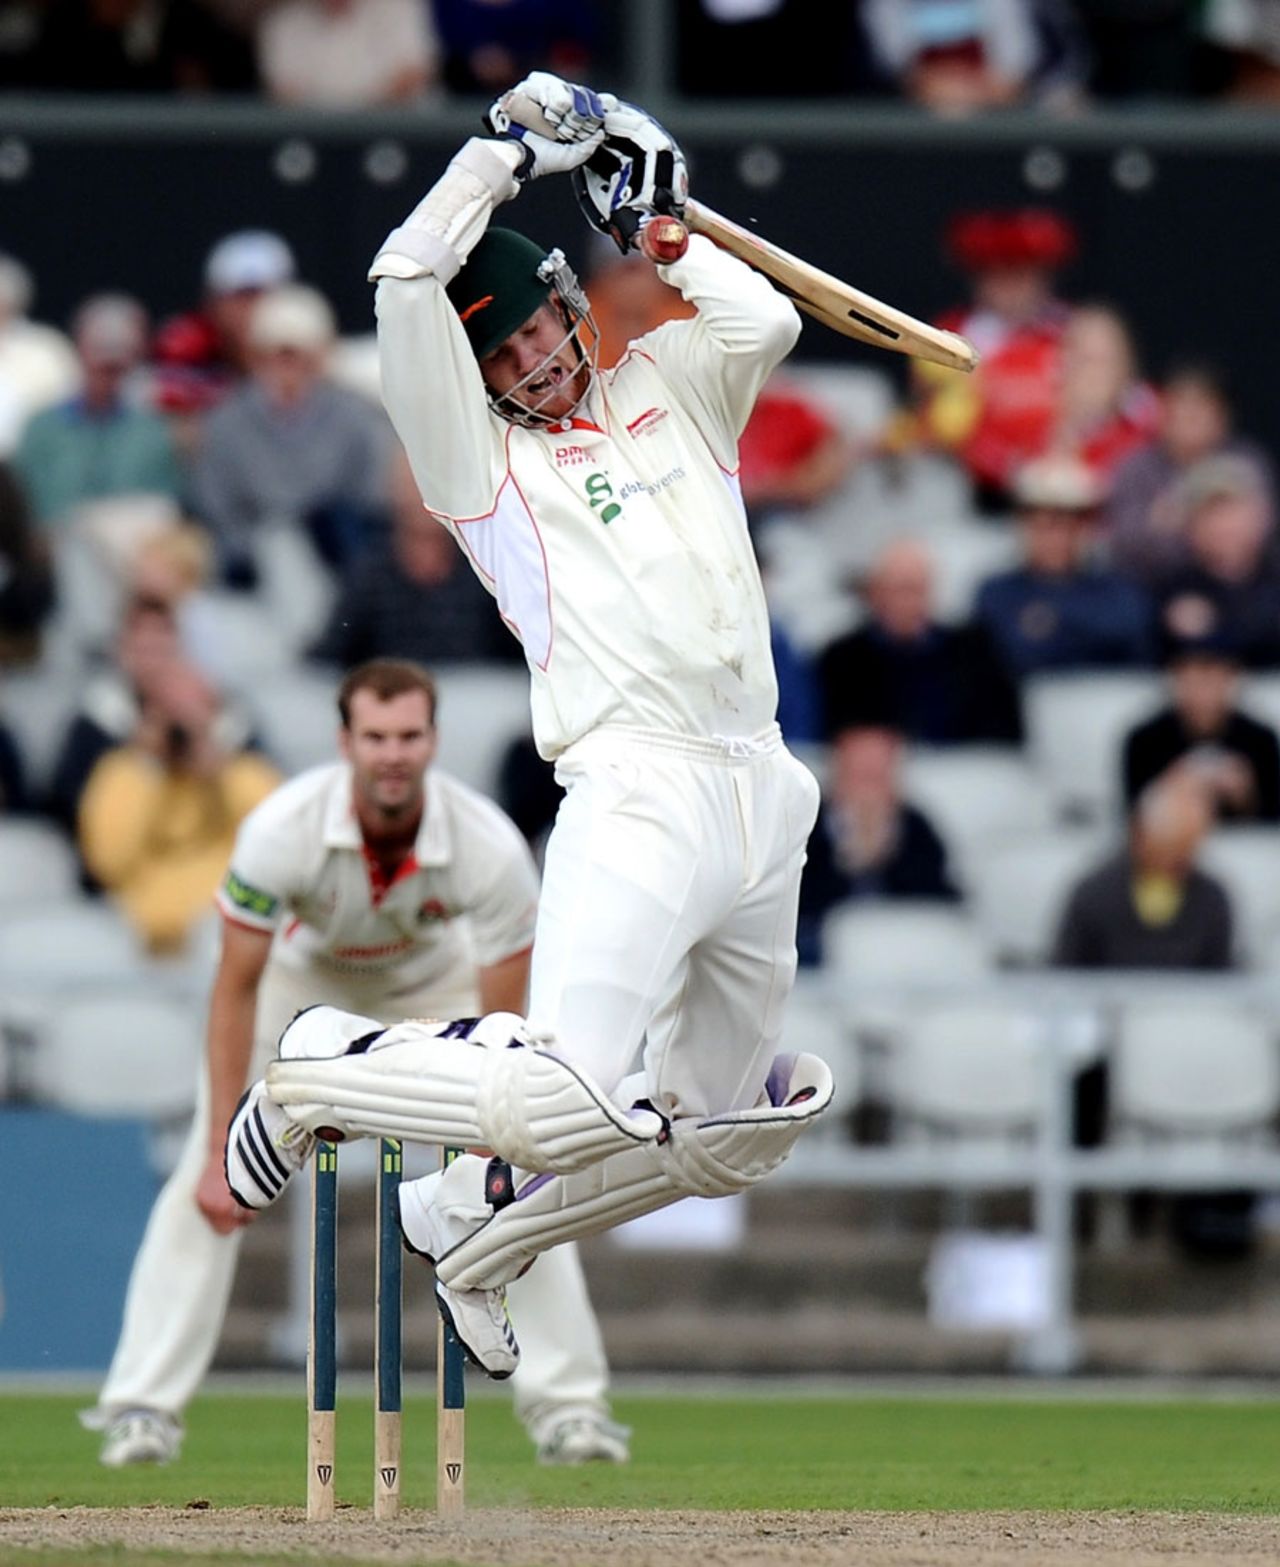 James Sykes attempts to avoid a bouncer, Lancashire v Leicestershire, County Championship, Division Two, Old Trafford, 4th day, September 14, 2013